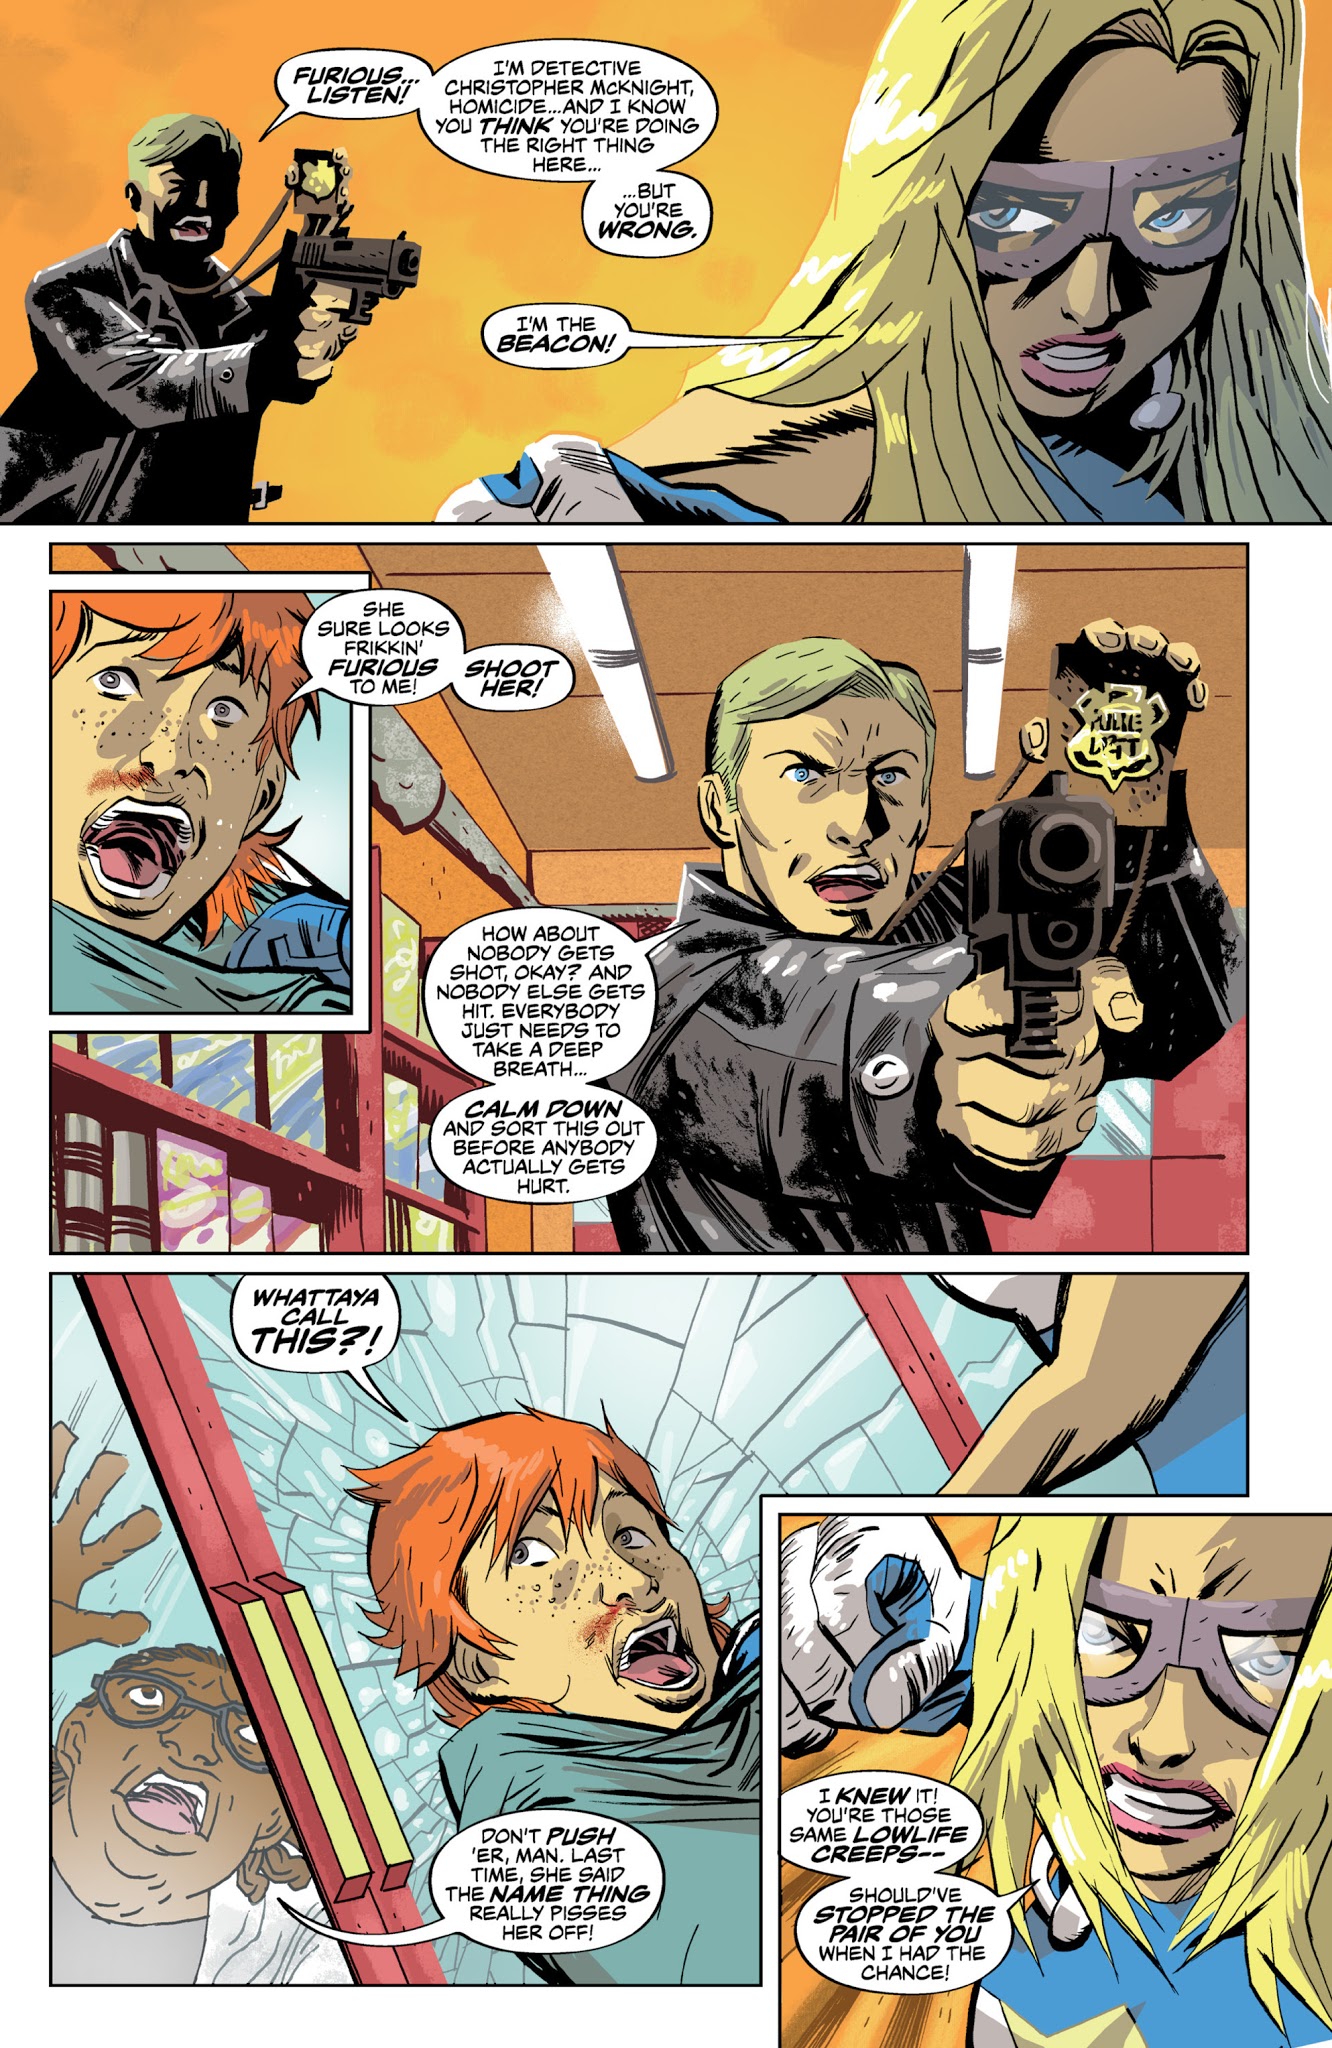 Read online Furious comic -  Issue # TPB - 86